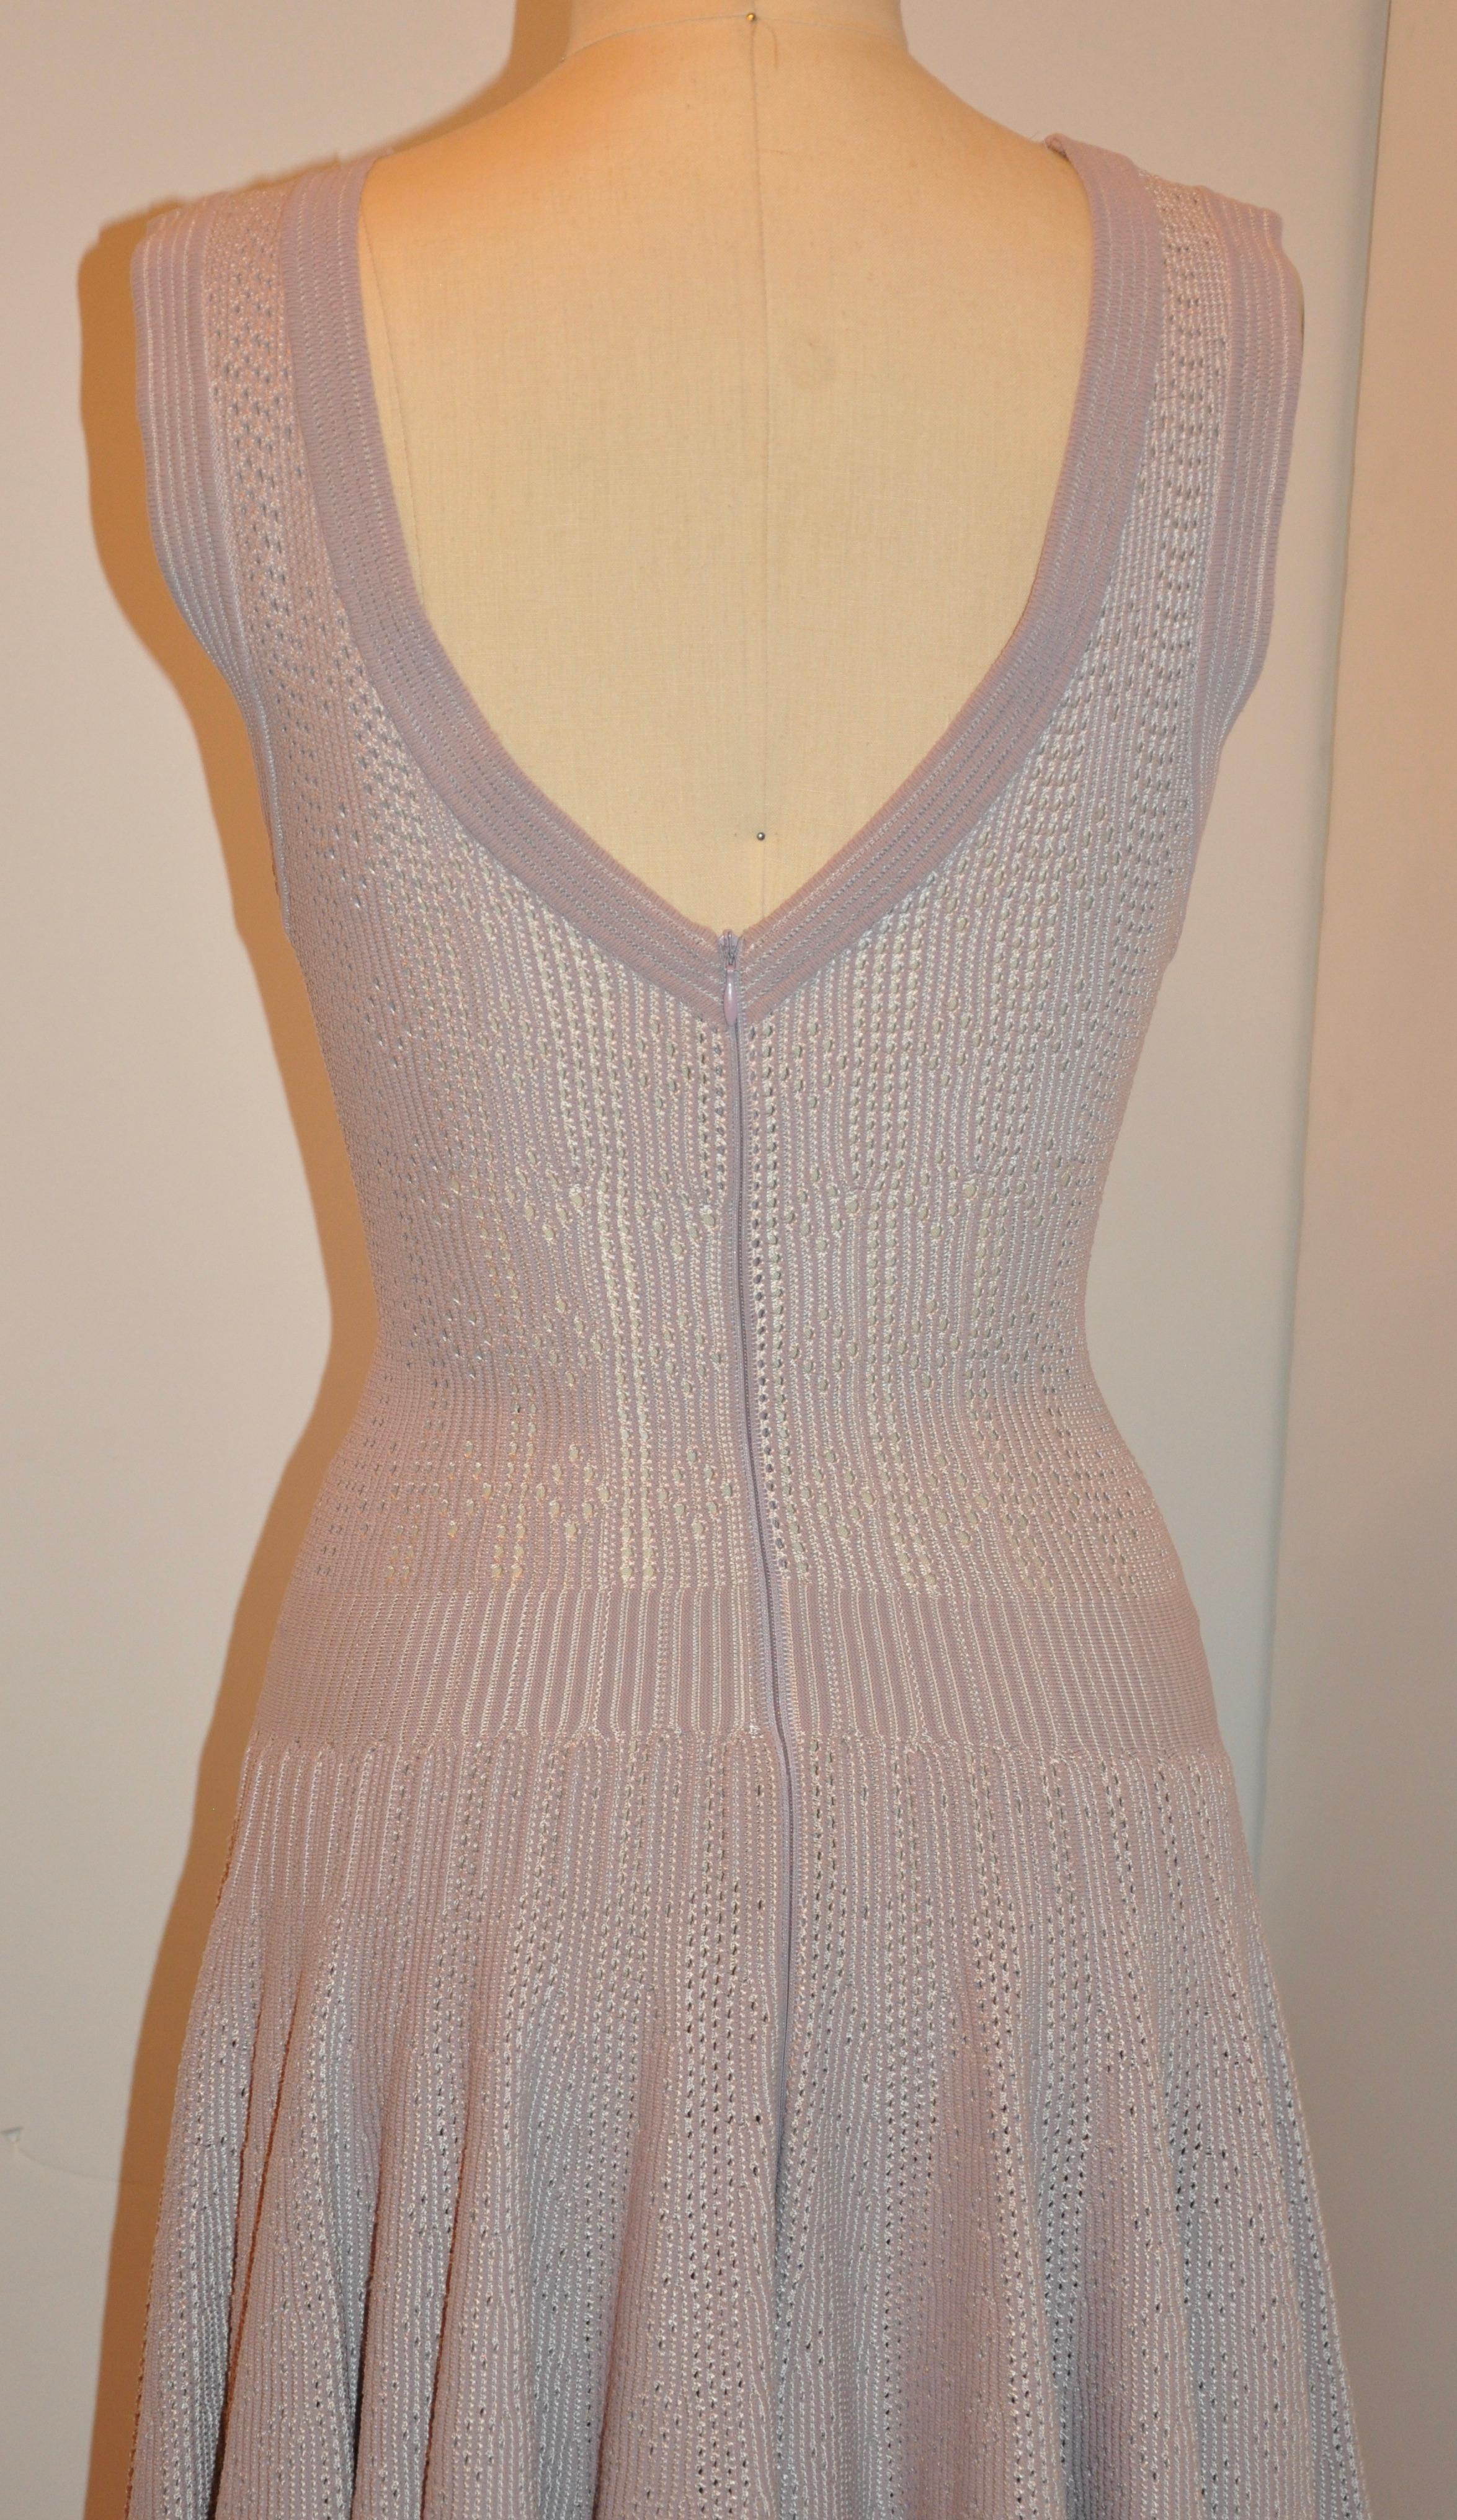 Rare Azzedine Alaia Signature Fawn-Hue Form-Fitting Eyelet Accented Swing Dress For Sale 6